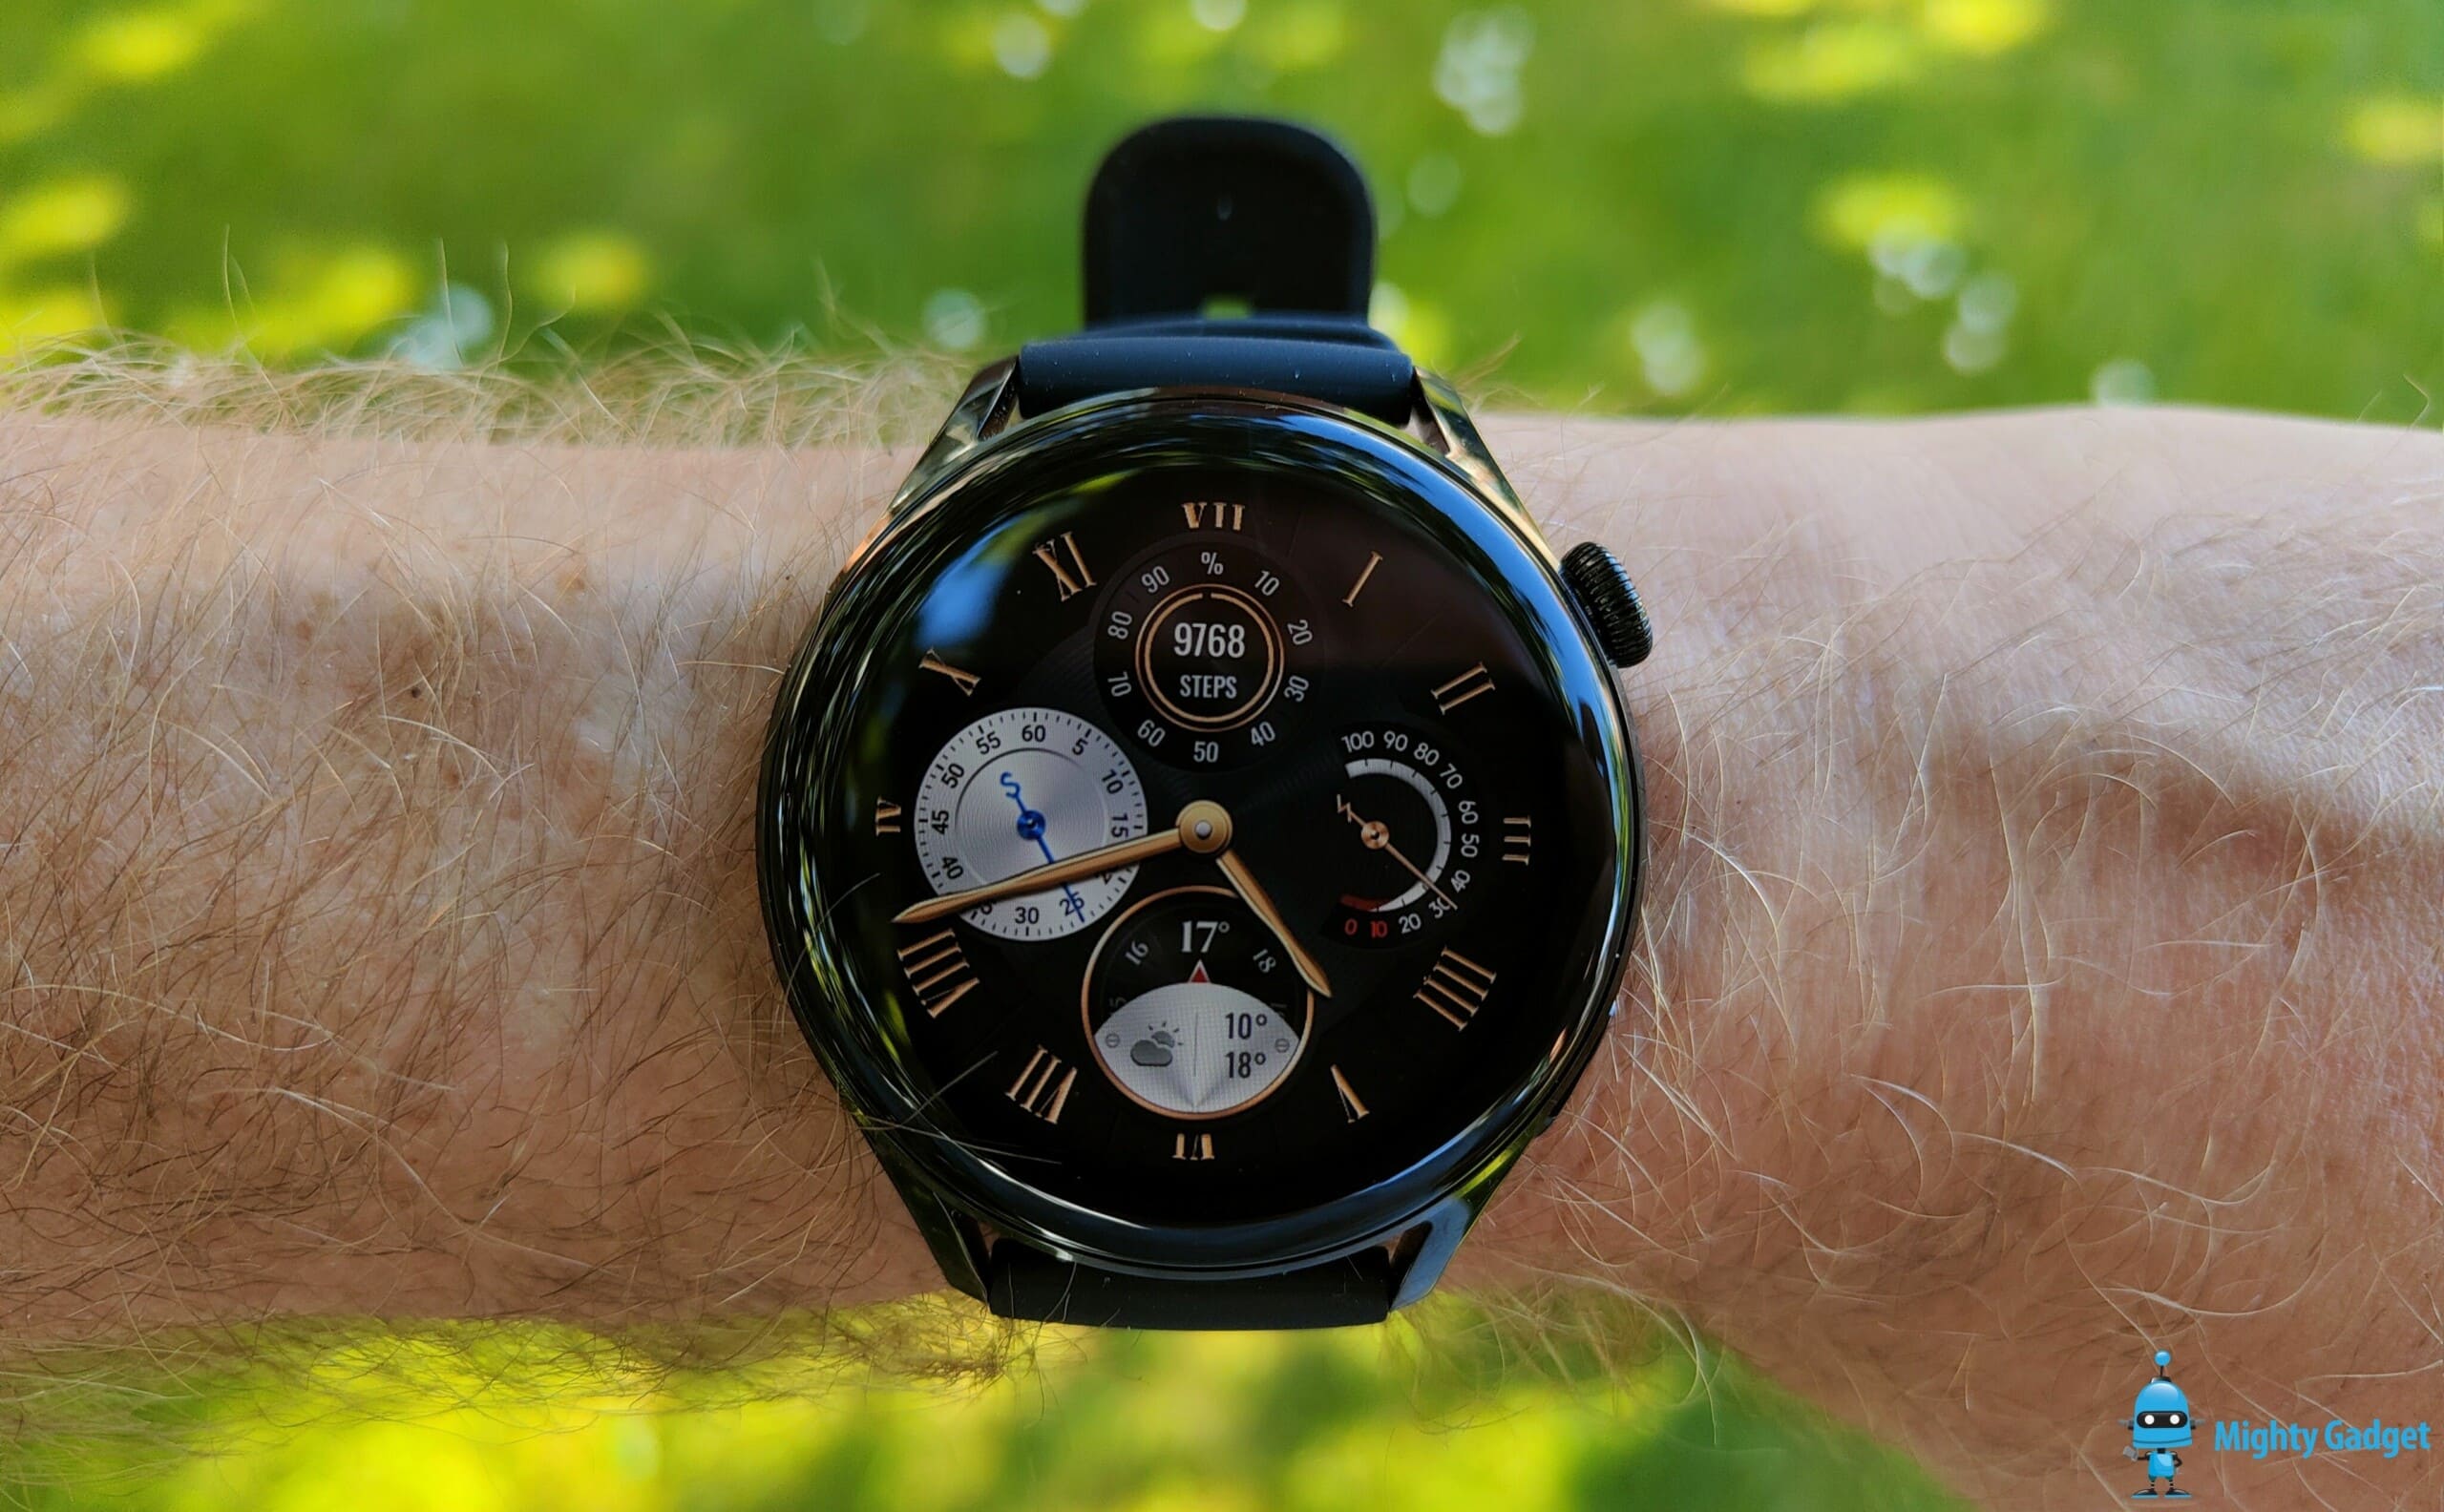 Huawei Watch 3 Review – Almost amazing, but some useful apps would be nice to justify the cost vs the Watch GT 2 series